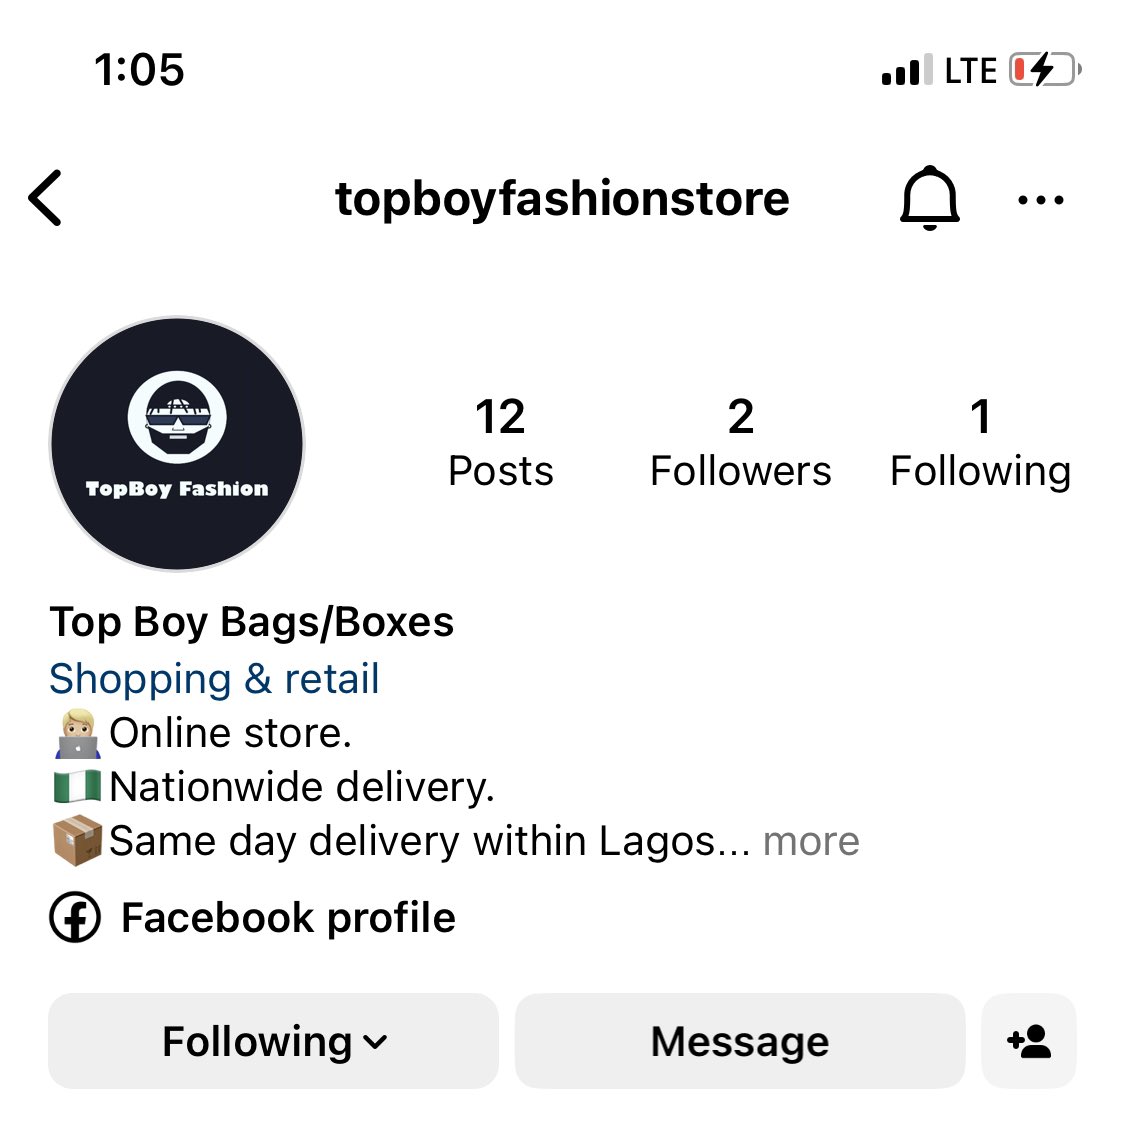 Giveaway ❗❗❗ Data for 30 people Click on link below, follow Topboyfashionstore and drop screenshot. instagram.com/topboyfashions… RT for others, good luck ♻️